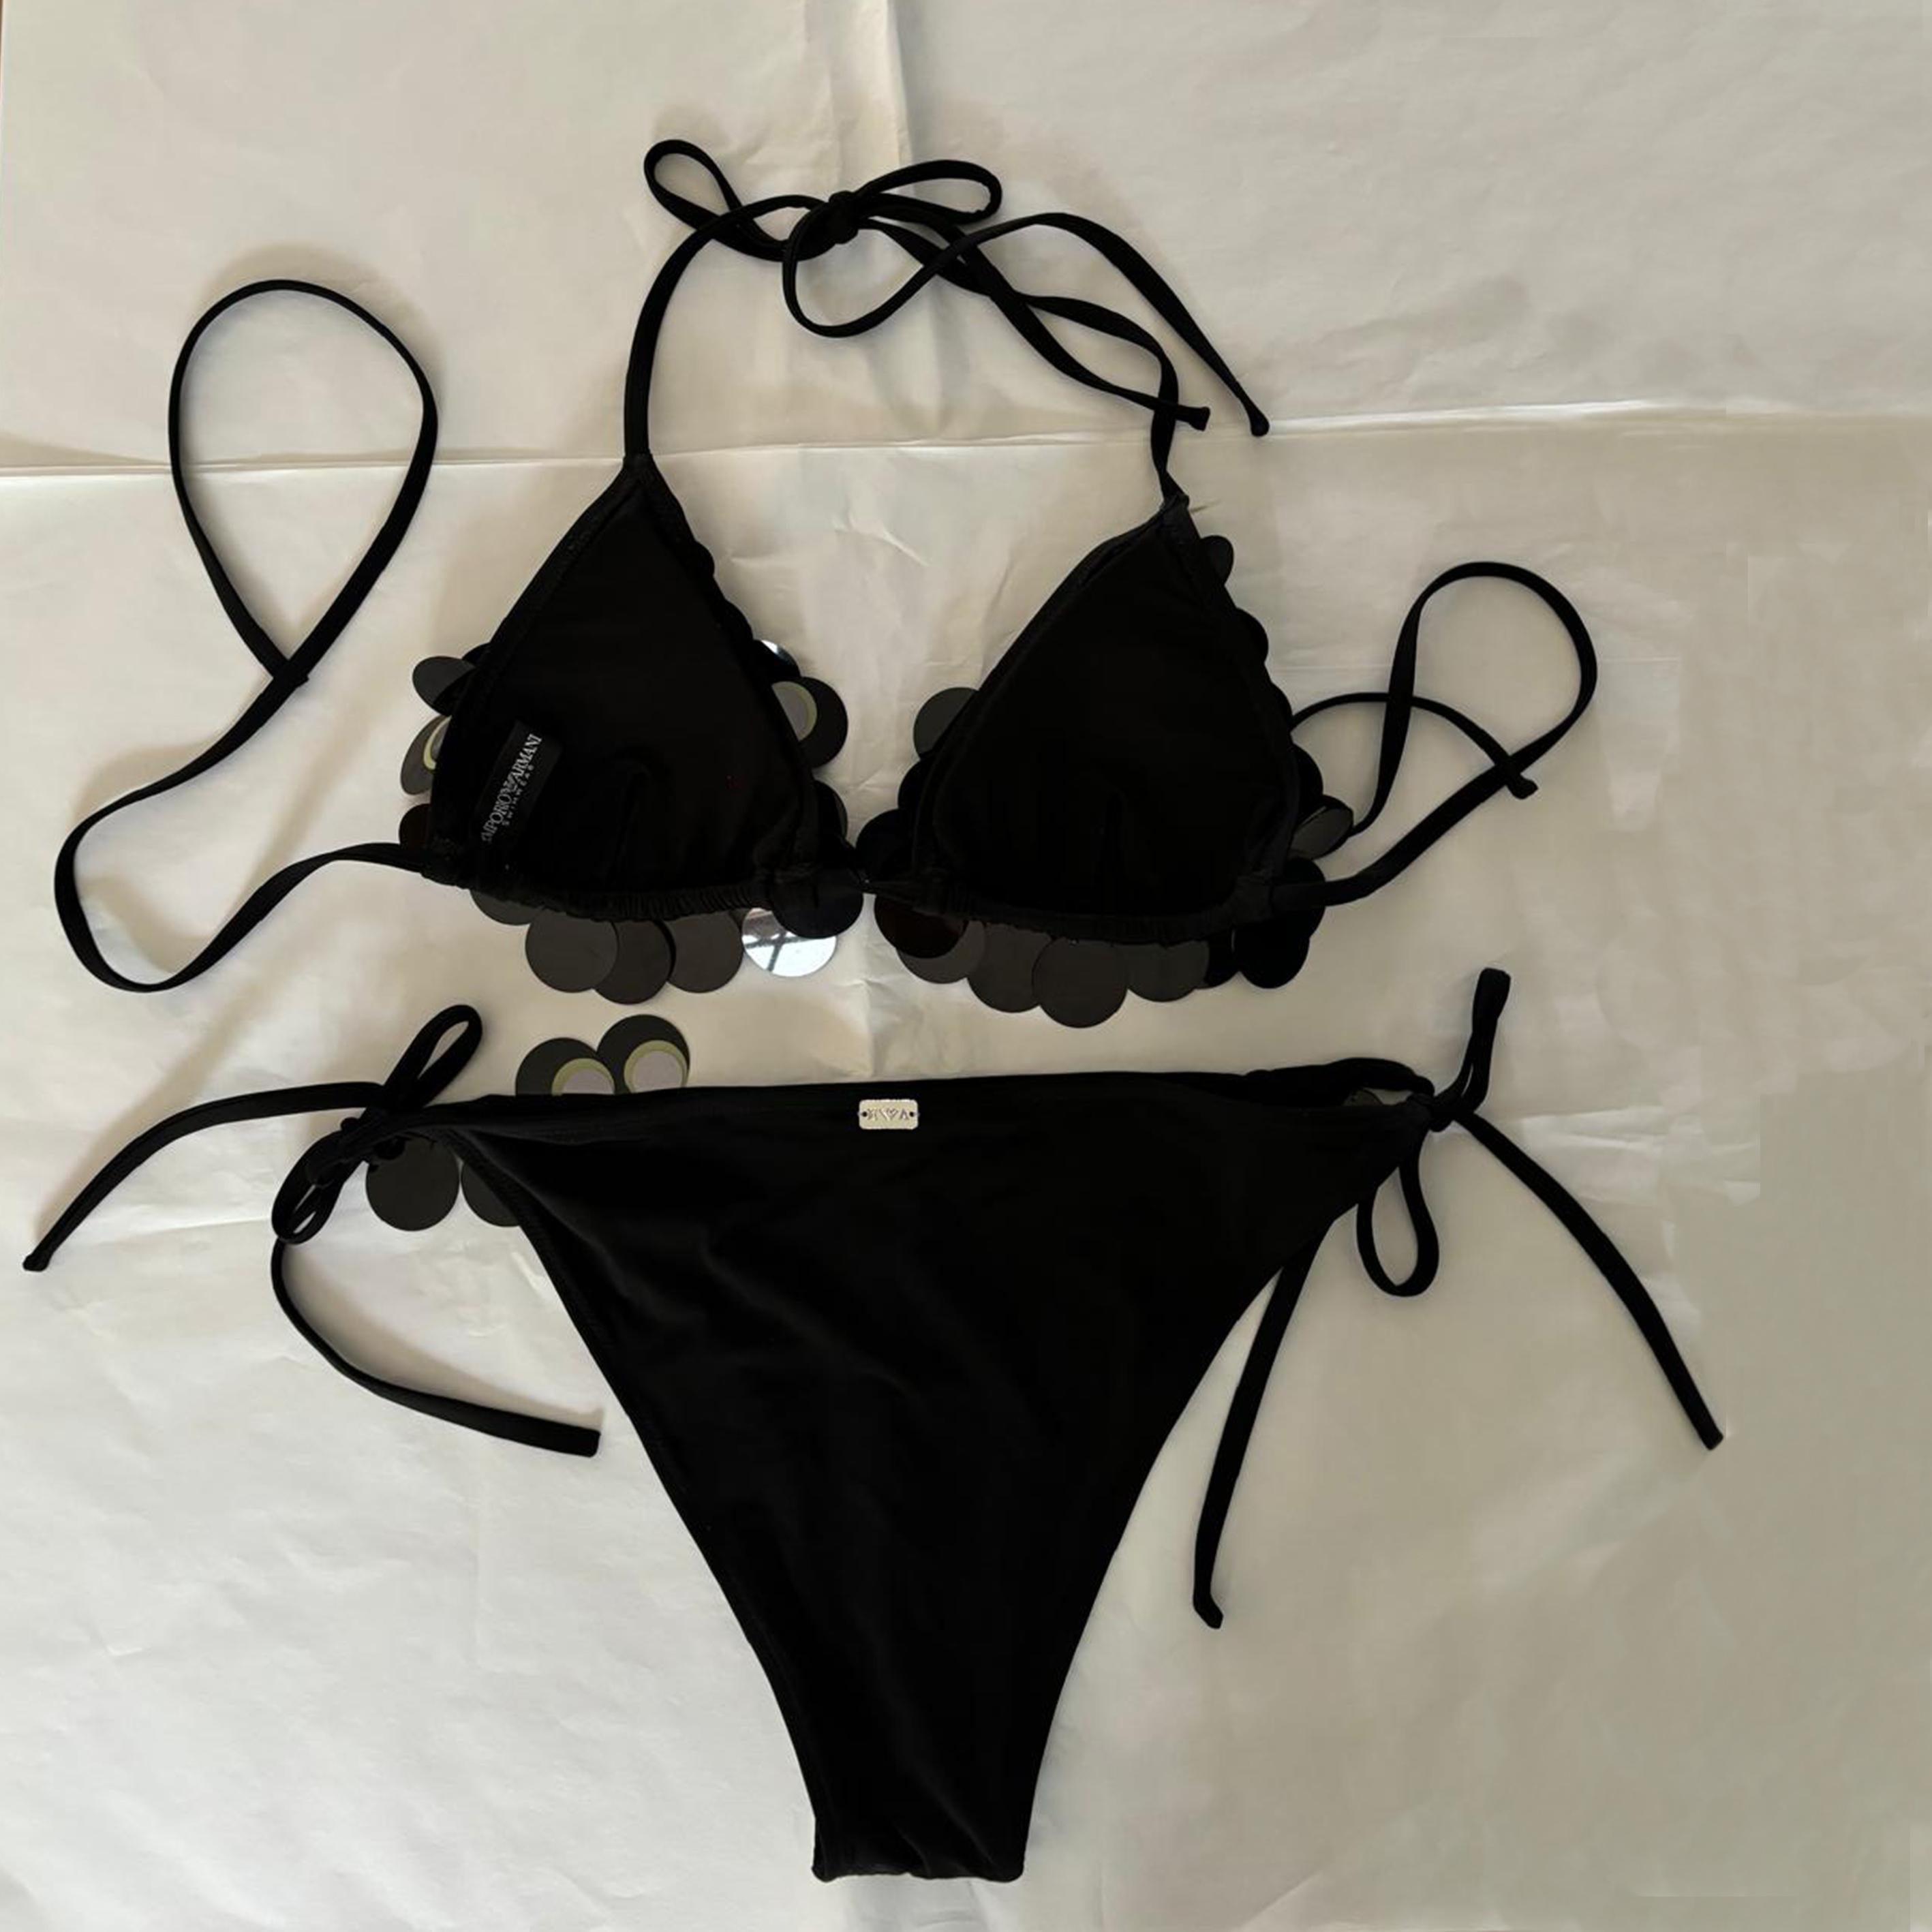 EMPORIO ARMANI SS2004 Black bikini with polymer circles

Tag ARMANI SS2004

Size S
Adjustable

Perfect condition

Shipping worldwide with tracking number